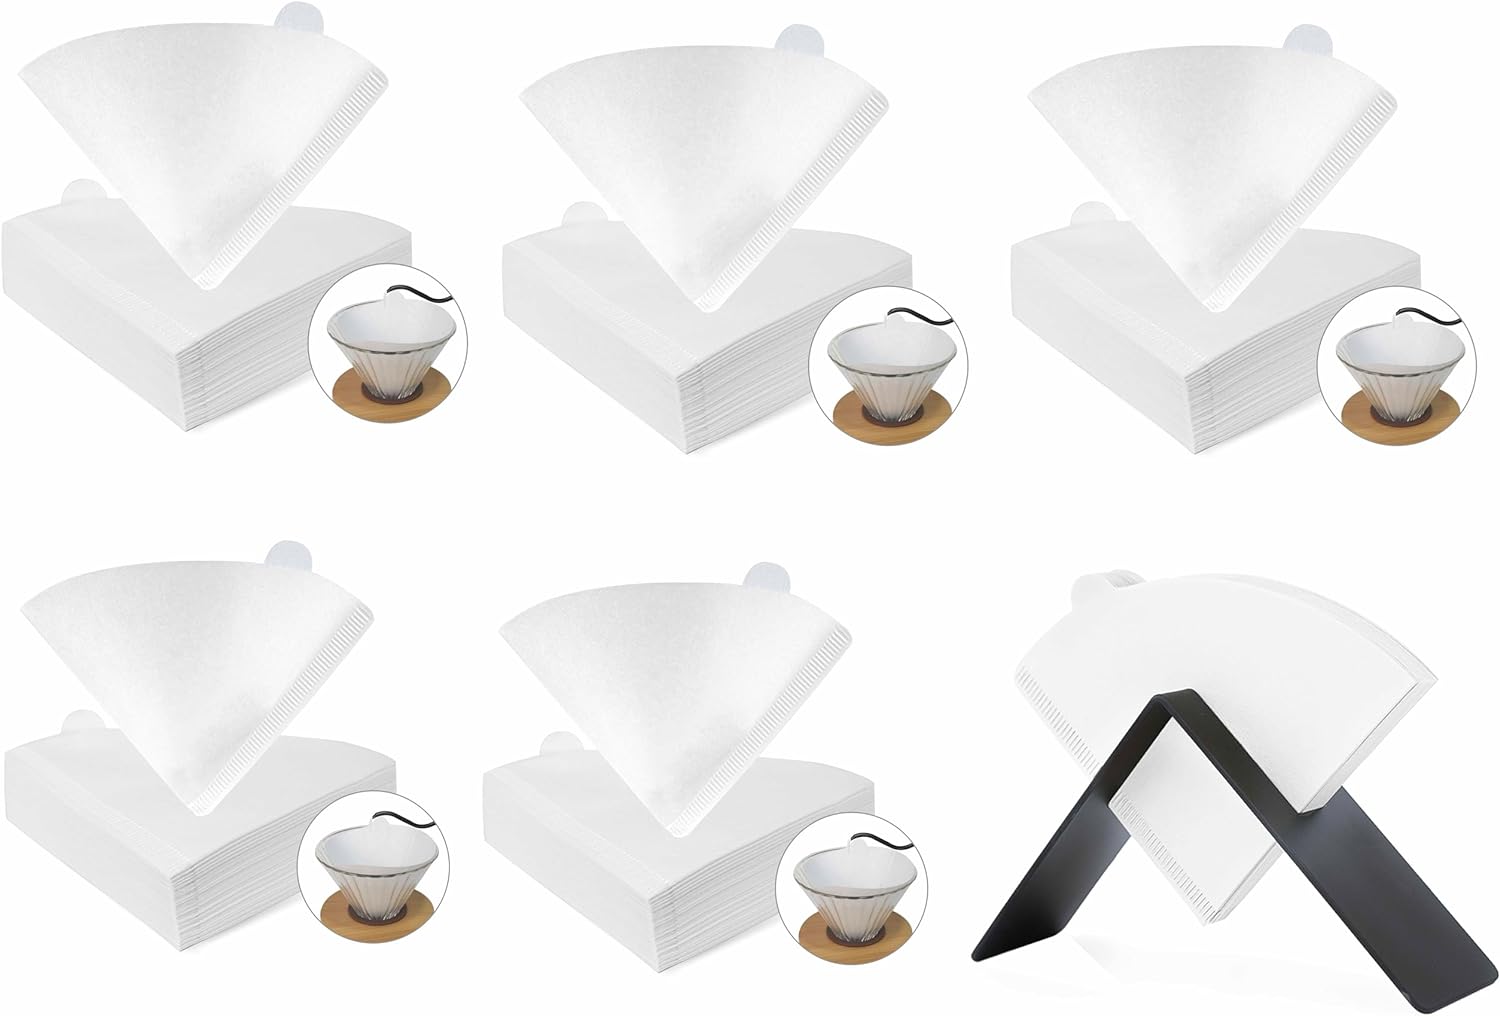 MIBRU Coffee Filters V60 Cone Paper White 100pcs Coffee Filters Unbleached Paper Filters Compatible with Pour Over Drippers 2-4 Cups Size 02 Coffee Filters v60 (1-4 Cups 02, 100)